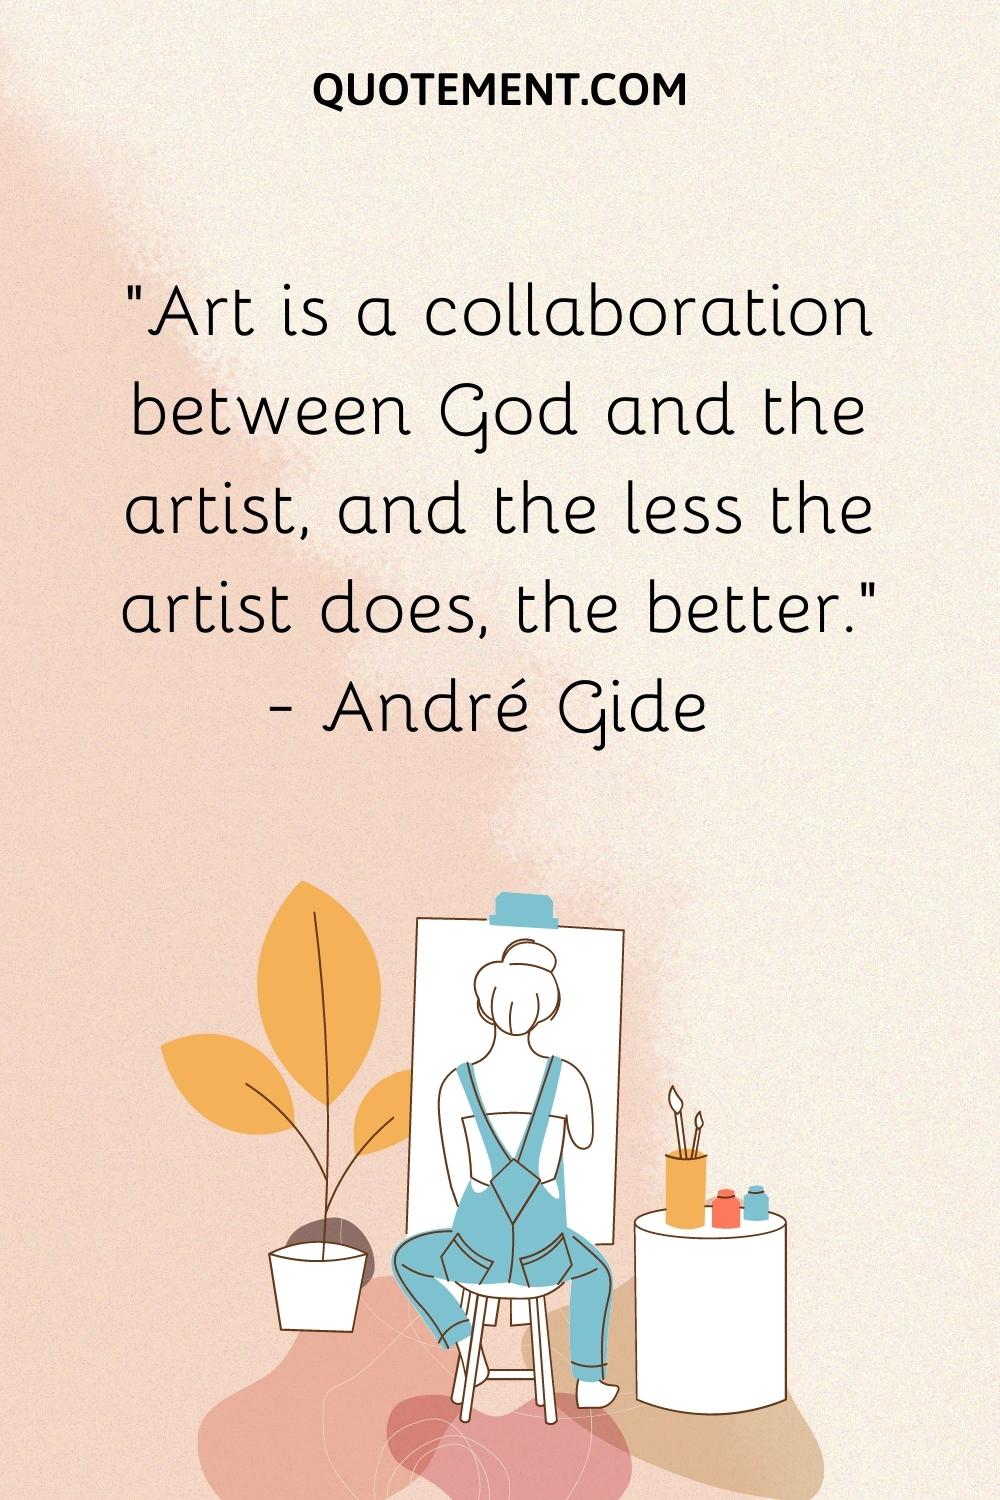 Art is a collaboration between God and the artist, and the less the artist does, the better